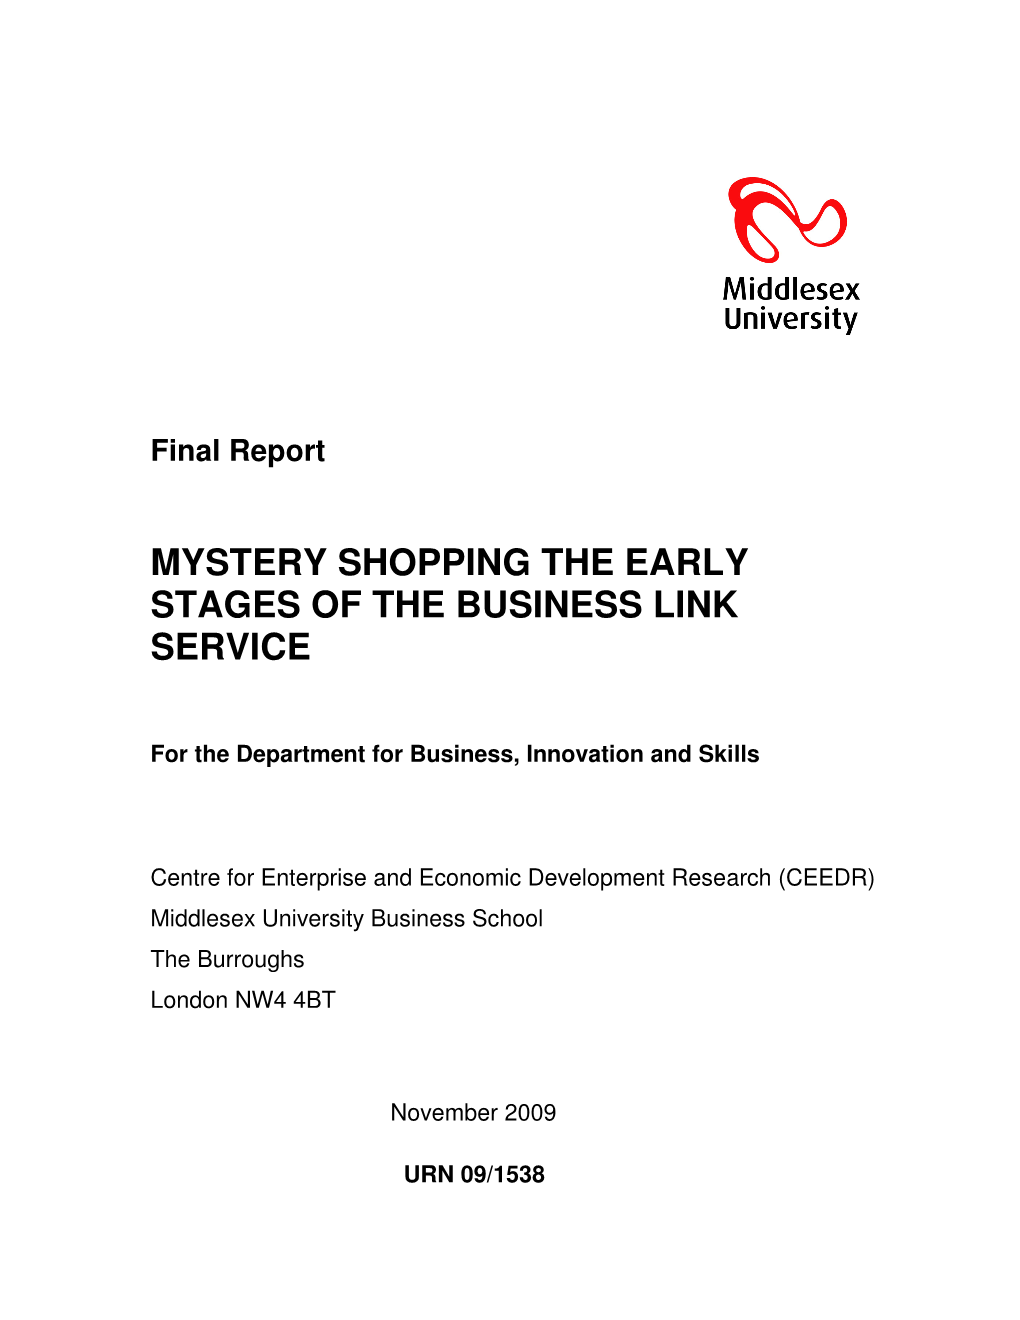 Mystery Shopping the Early Stages of the Business Link Service